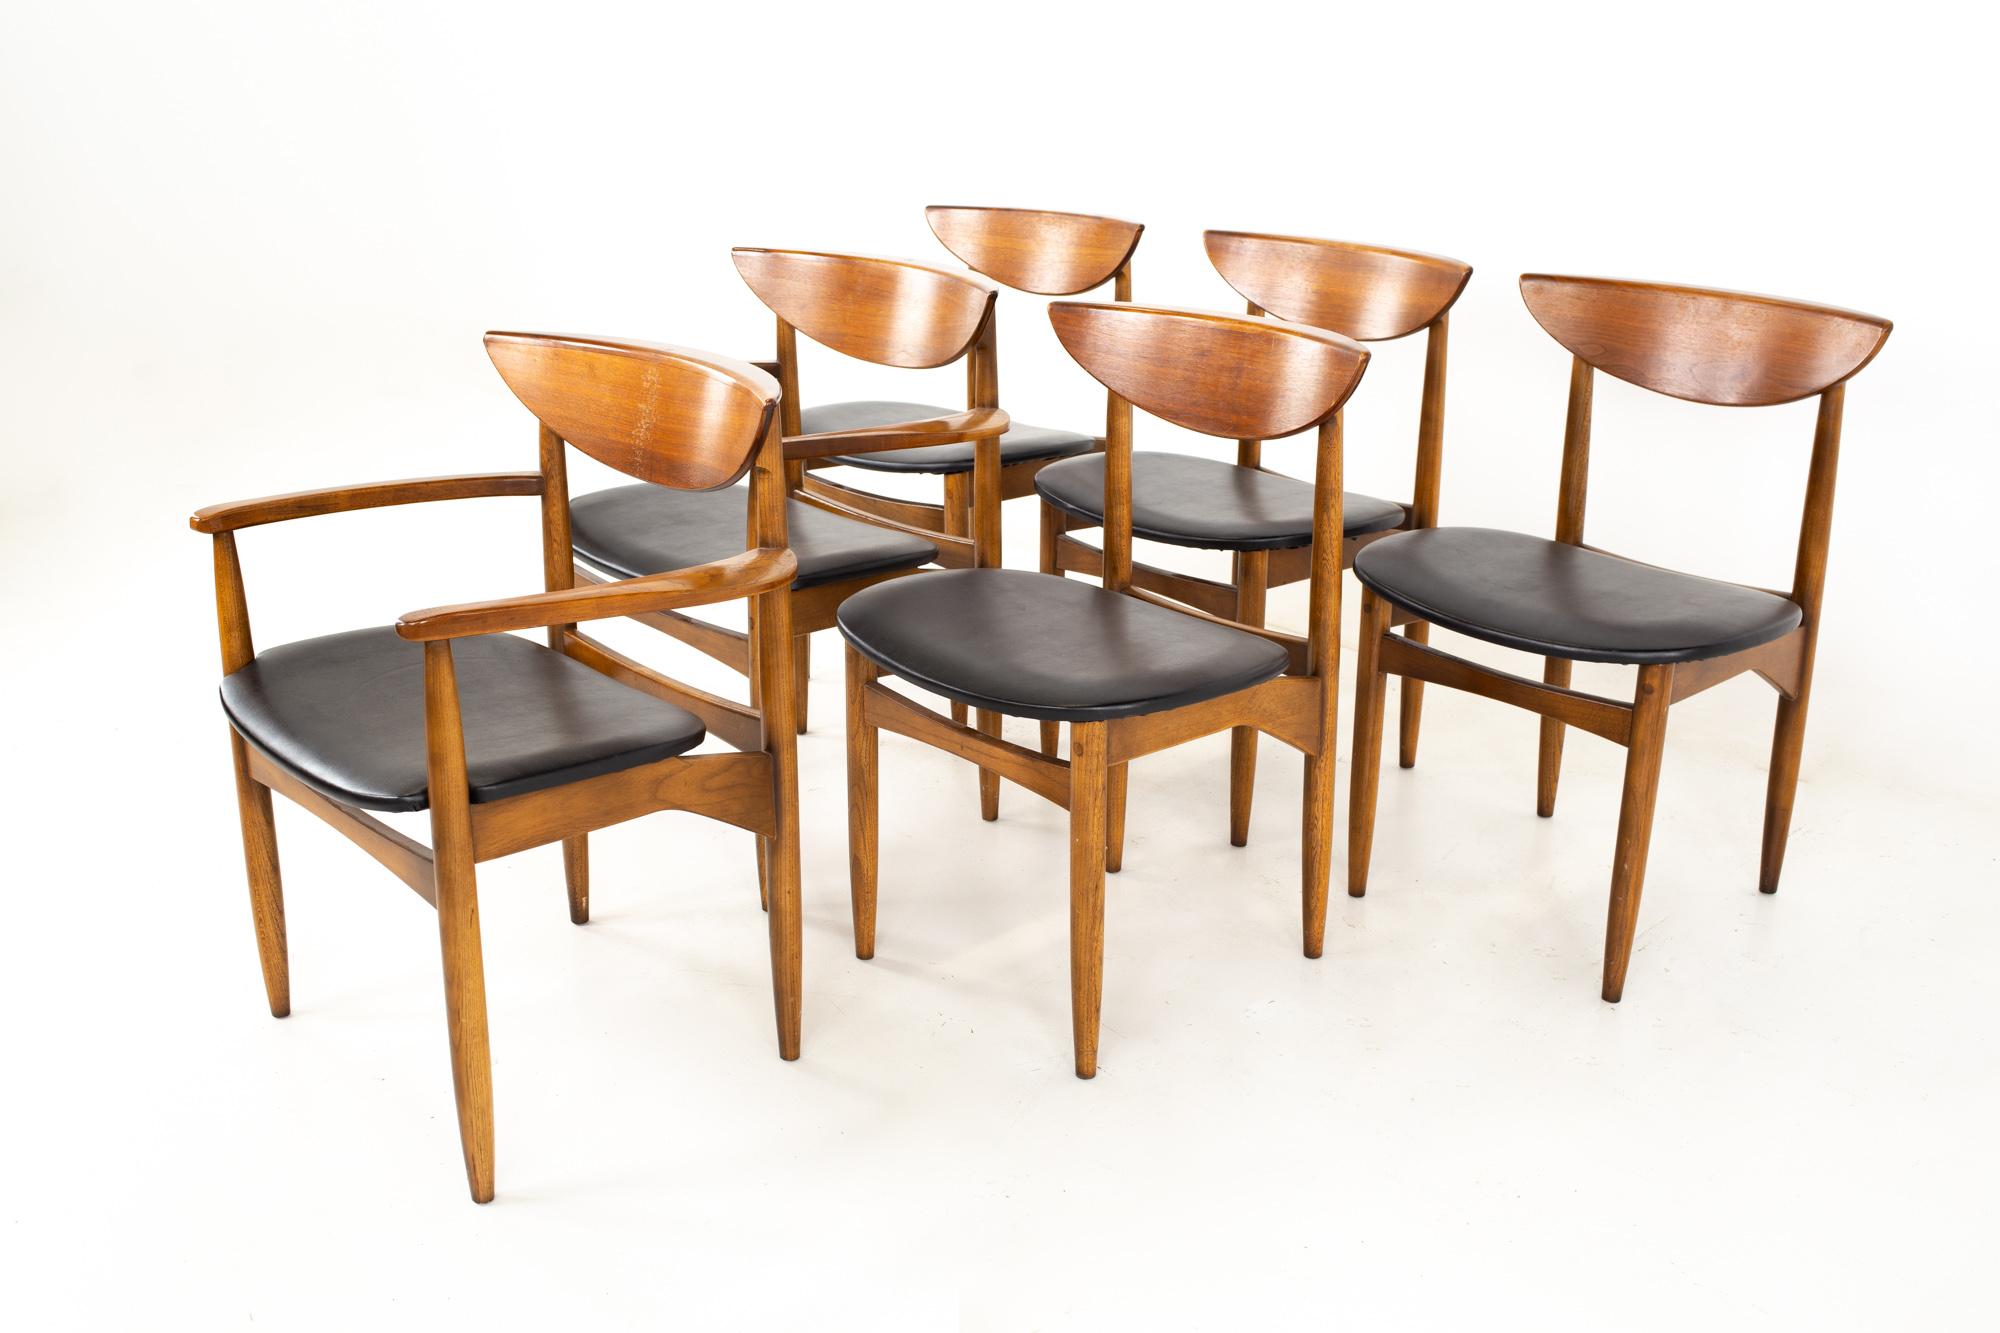 Warren Church for Lane perception mid century walnut cat's eye dining chairs - set of 6
Each chair measures: 22 wide x 19 deep x 30 high, with a seat height of 17.5 inches

All pieces of furniture can be had in what we call restored vintage